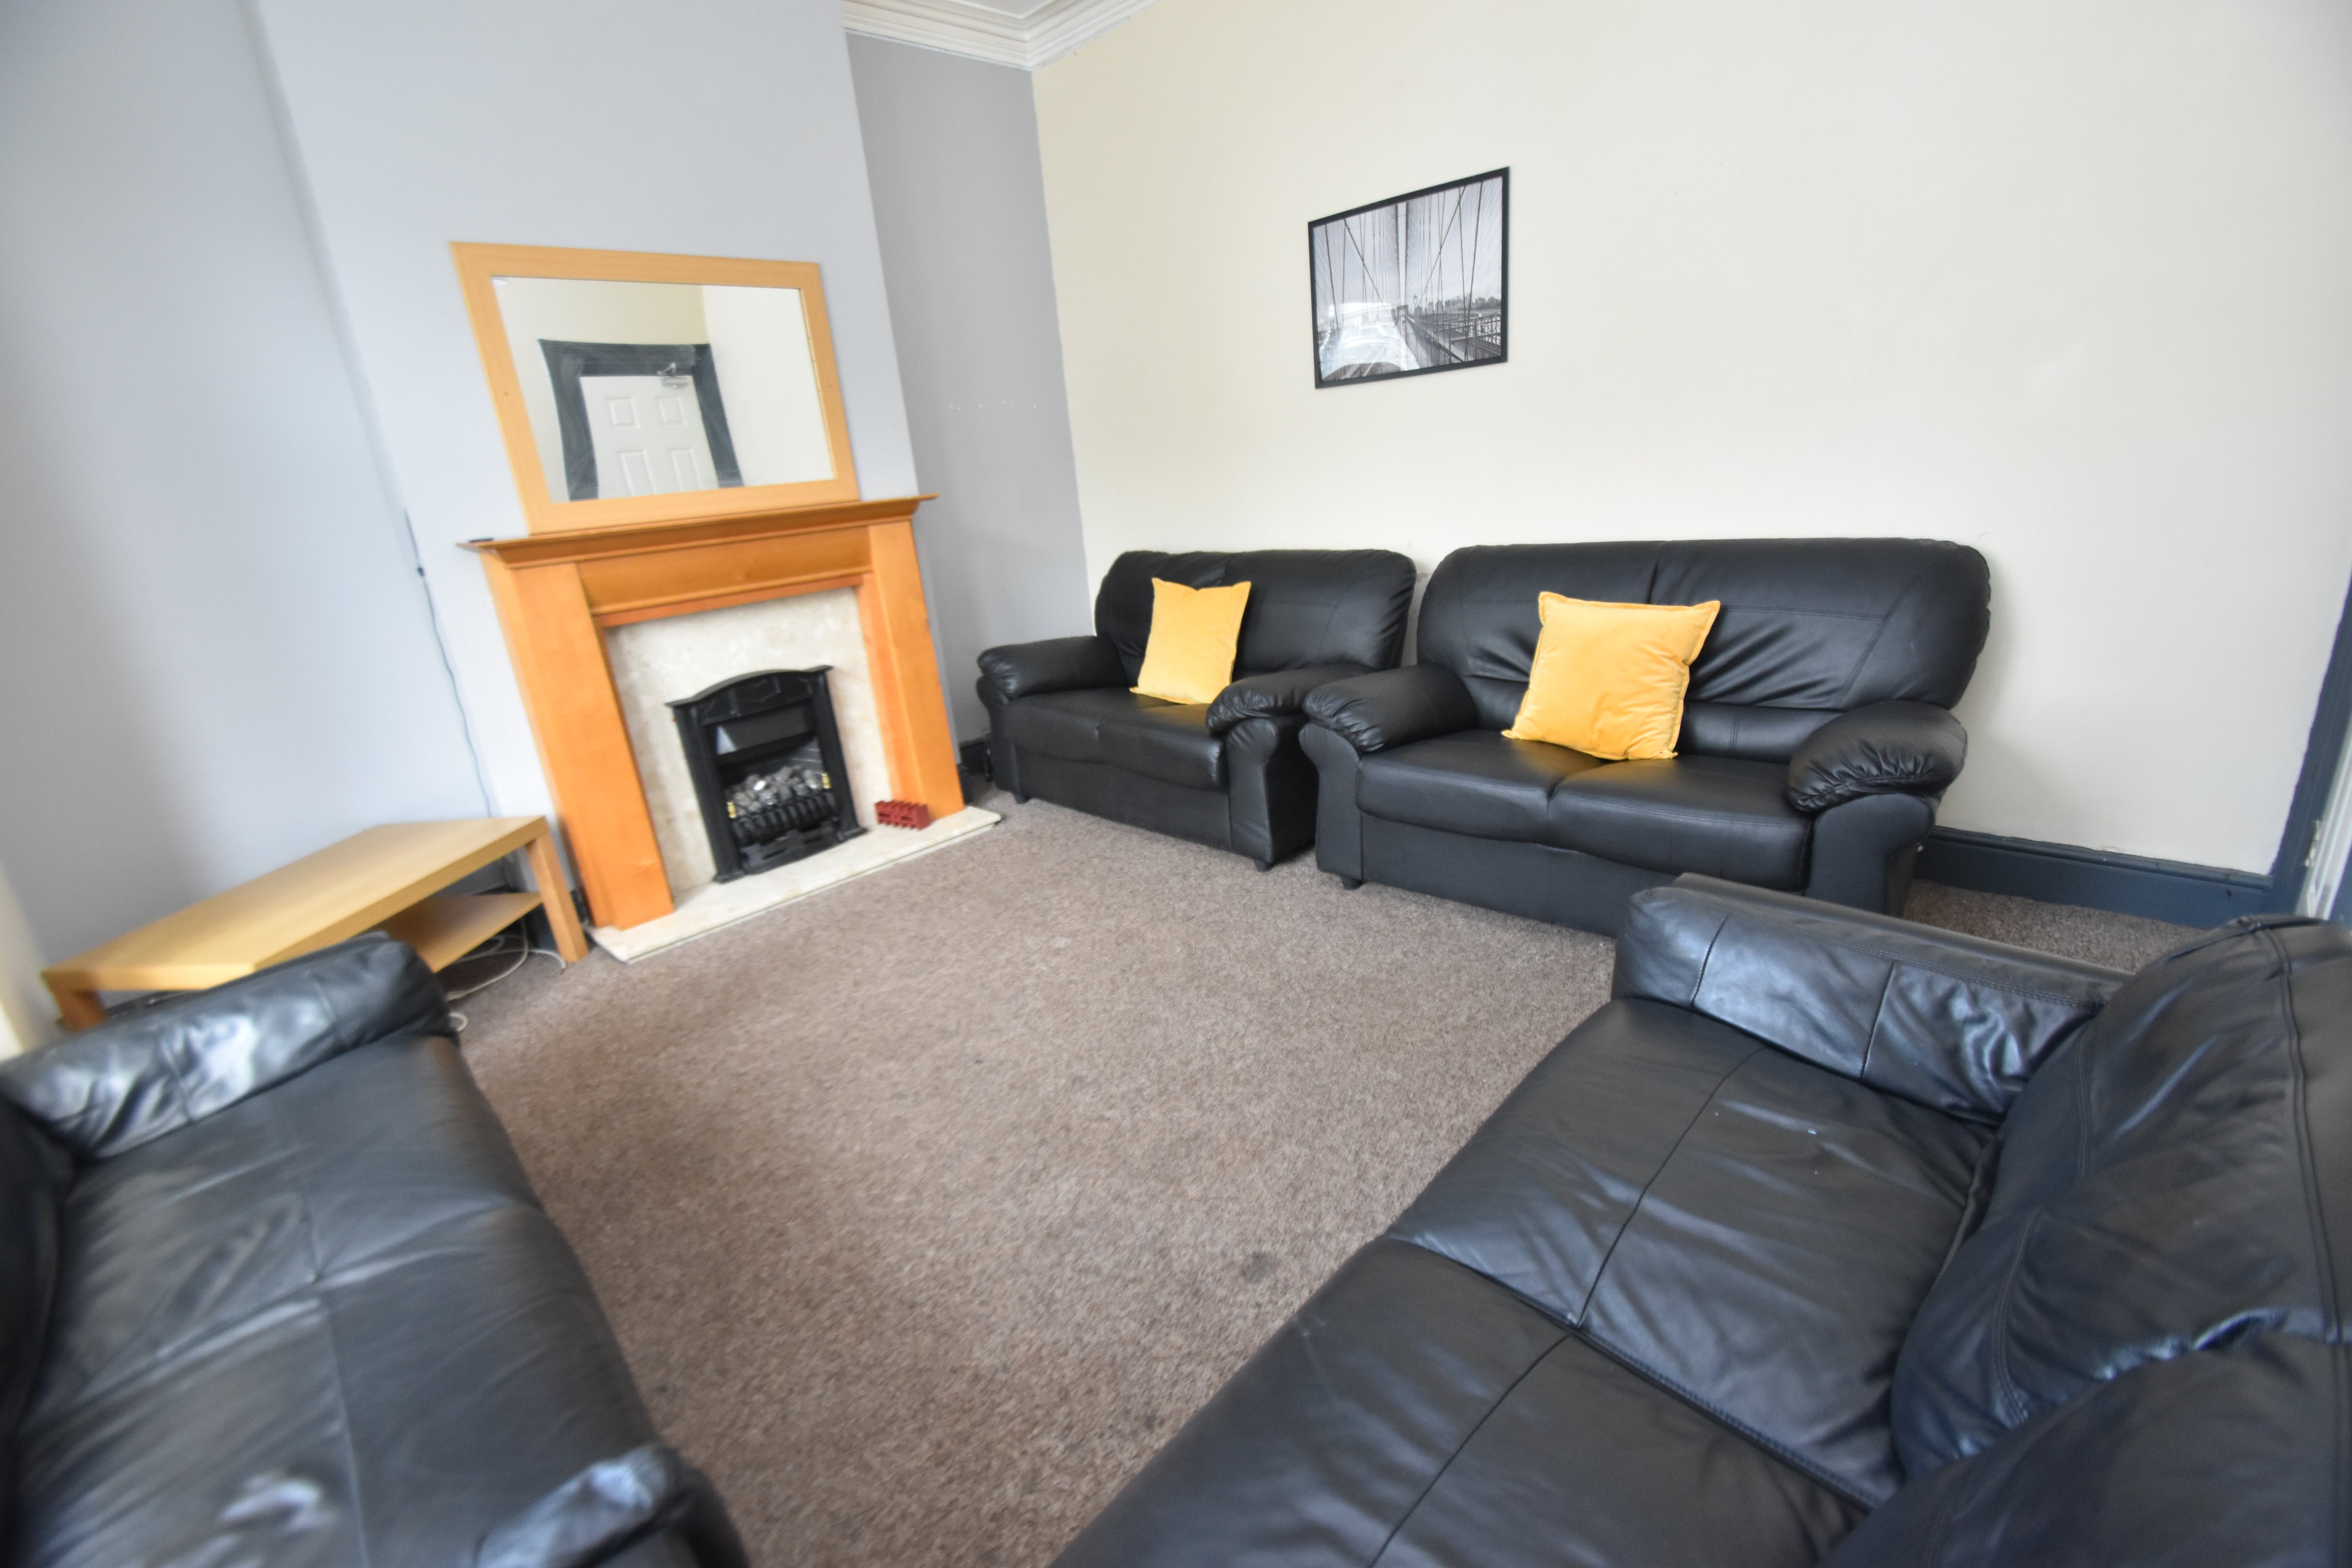 8 bed house to rent in Harriet Street, CATHAYS  - Property Image 4